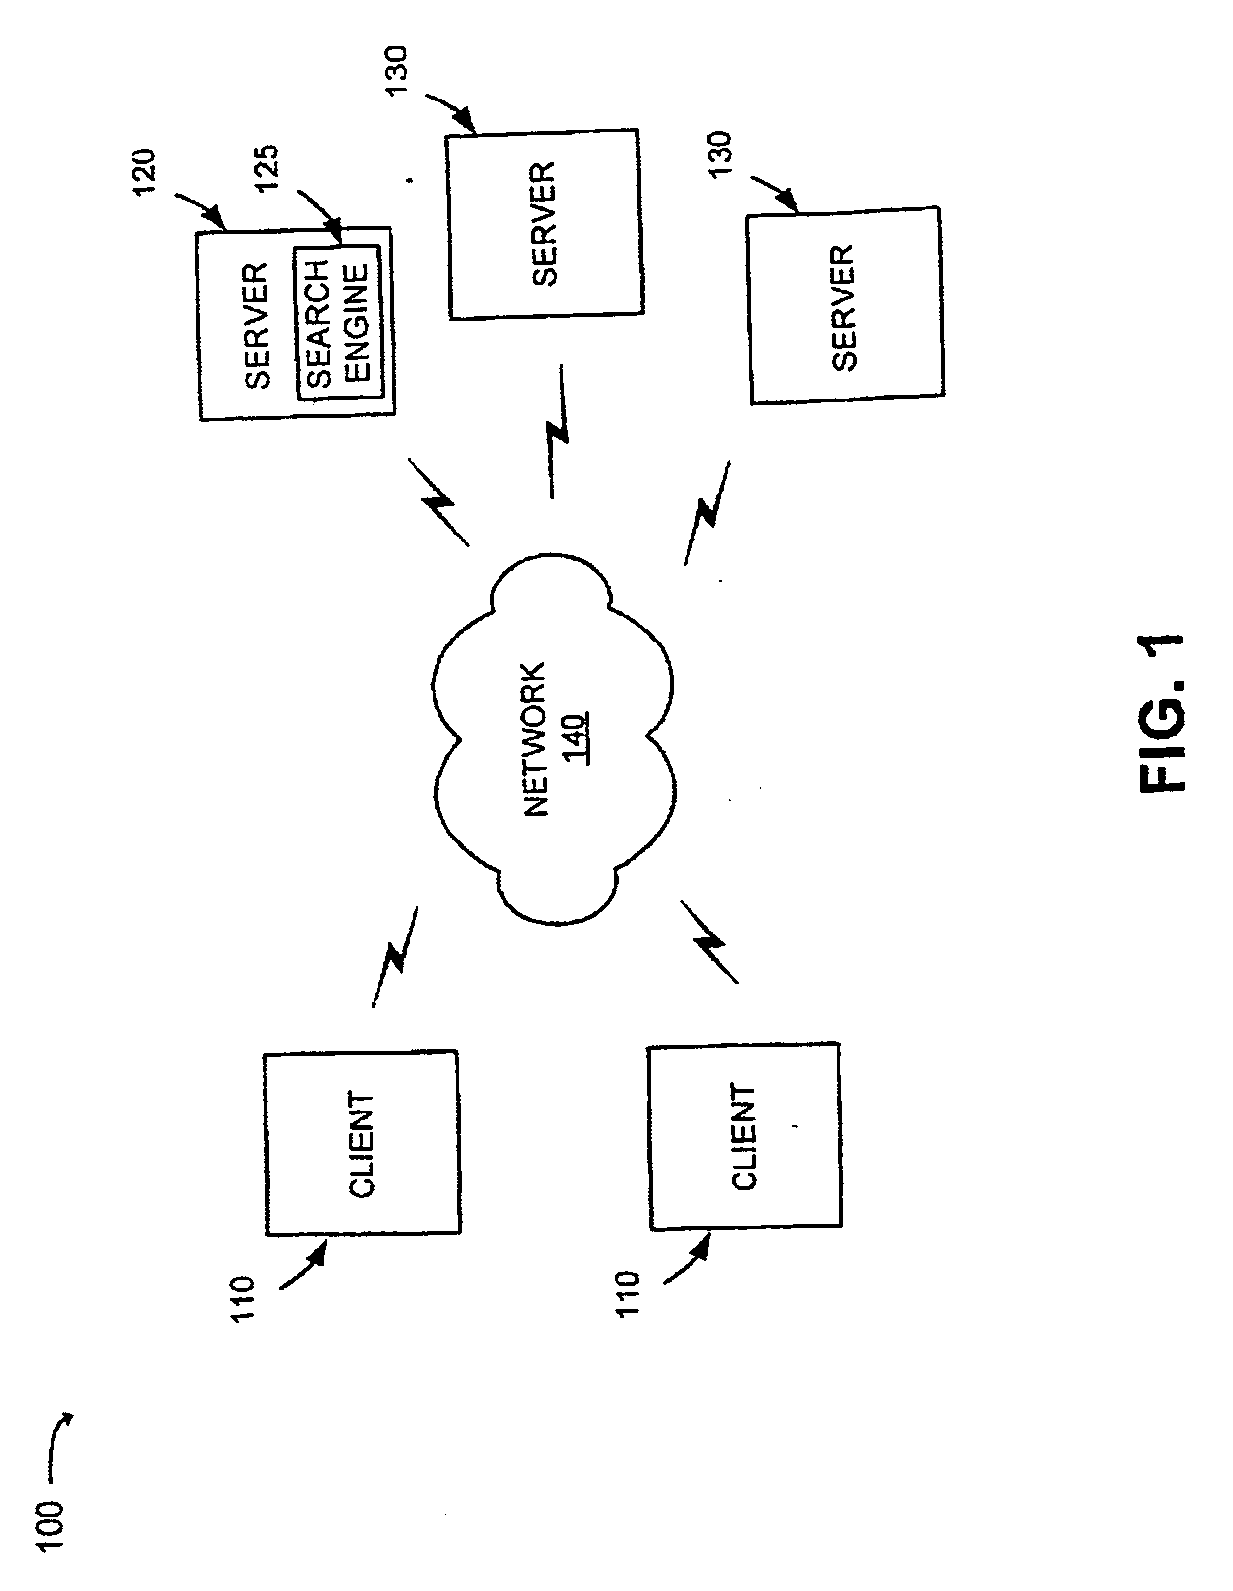 Methods and apparatus for using personal background data to improve the organization of documents retrieved in response to a search query